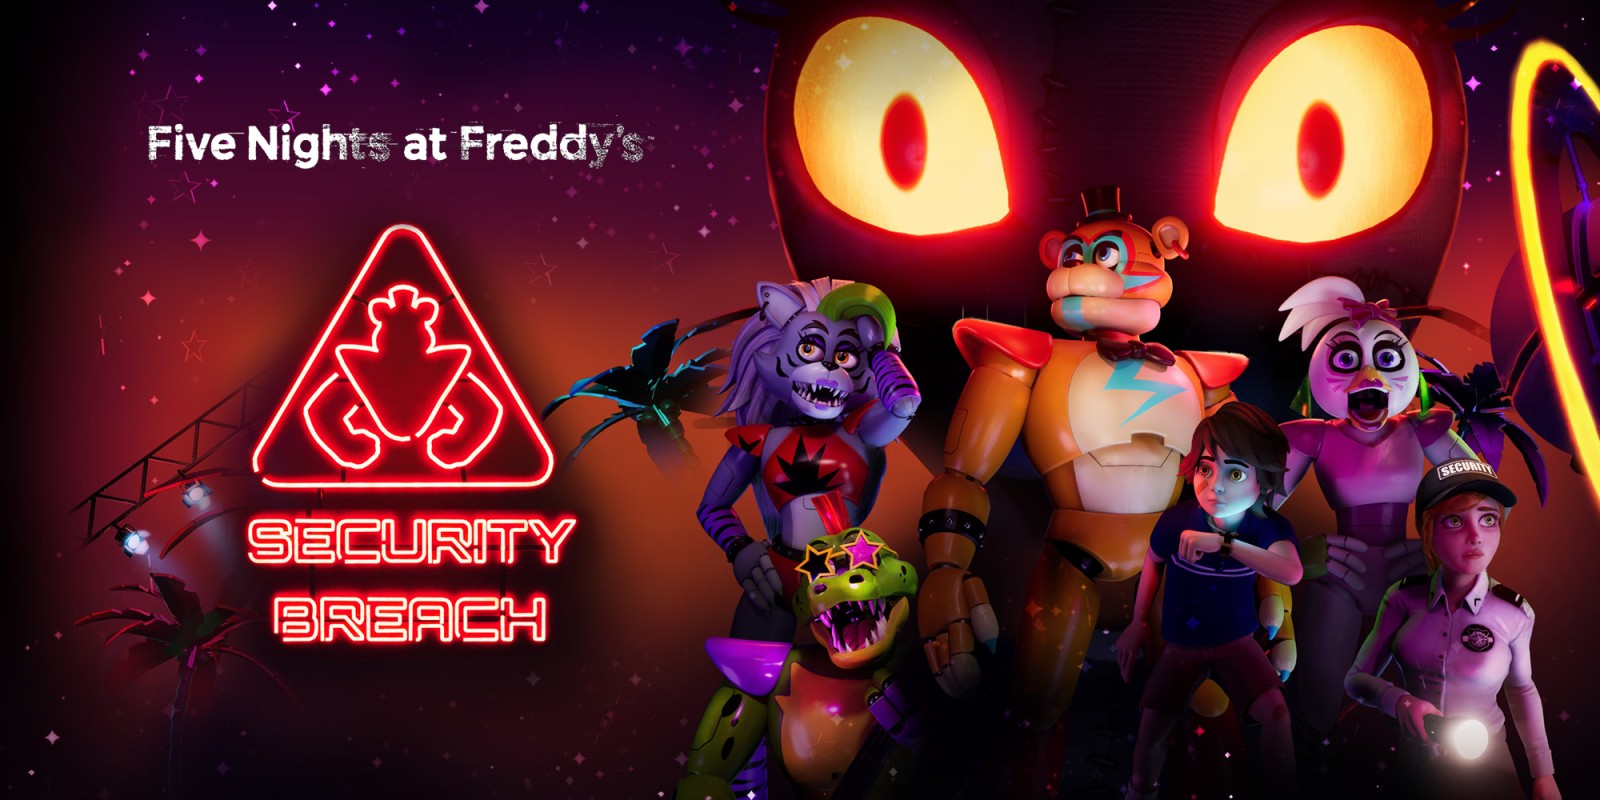 adriana valdes recommends images of five nights at freddys pic